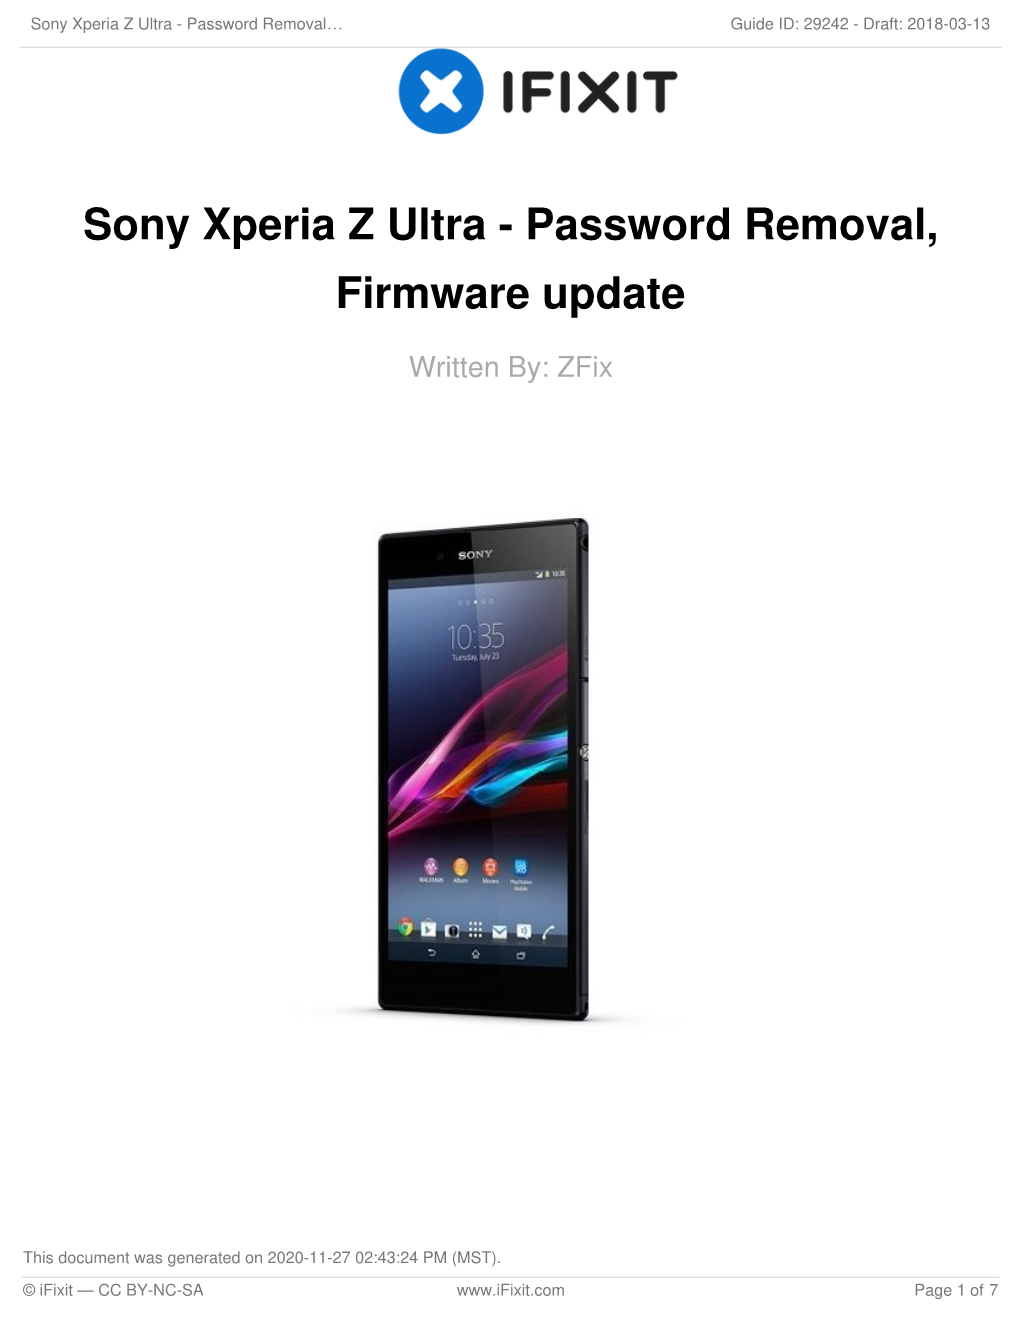 Sony Xperia Z Ultra - Password Removal… Guide ID: 29242 - Draft: 2018-03-13